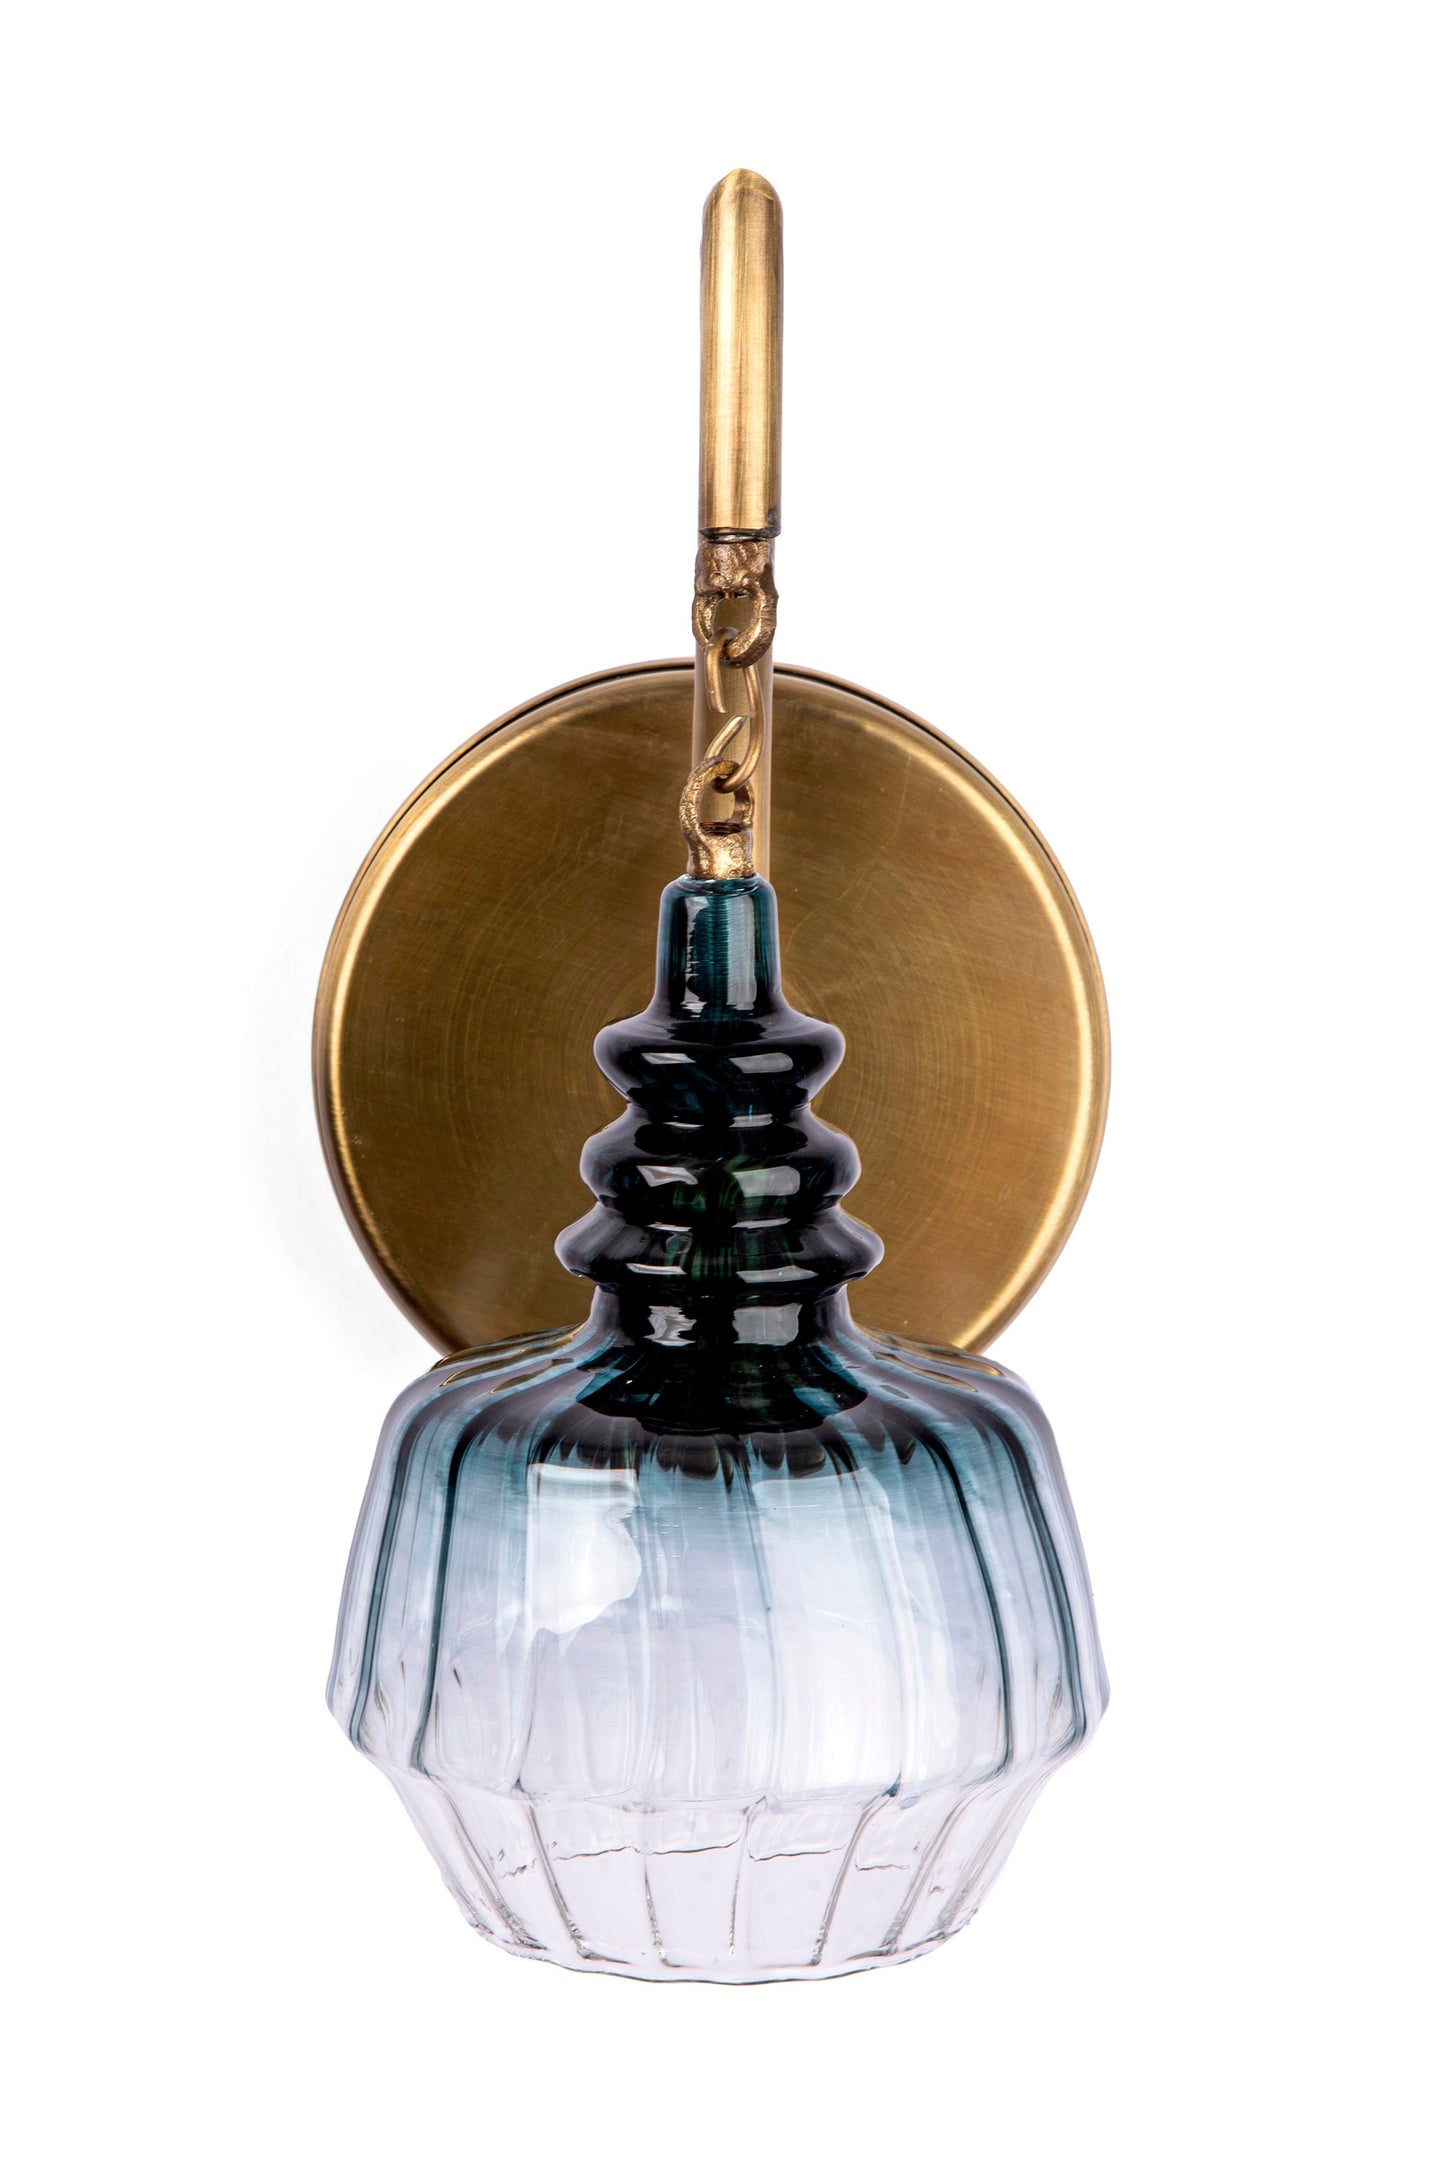 Blown Glass Wall Hangings - Les Trois Pyramides